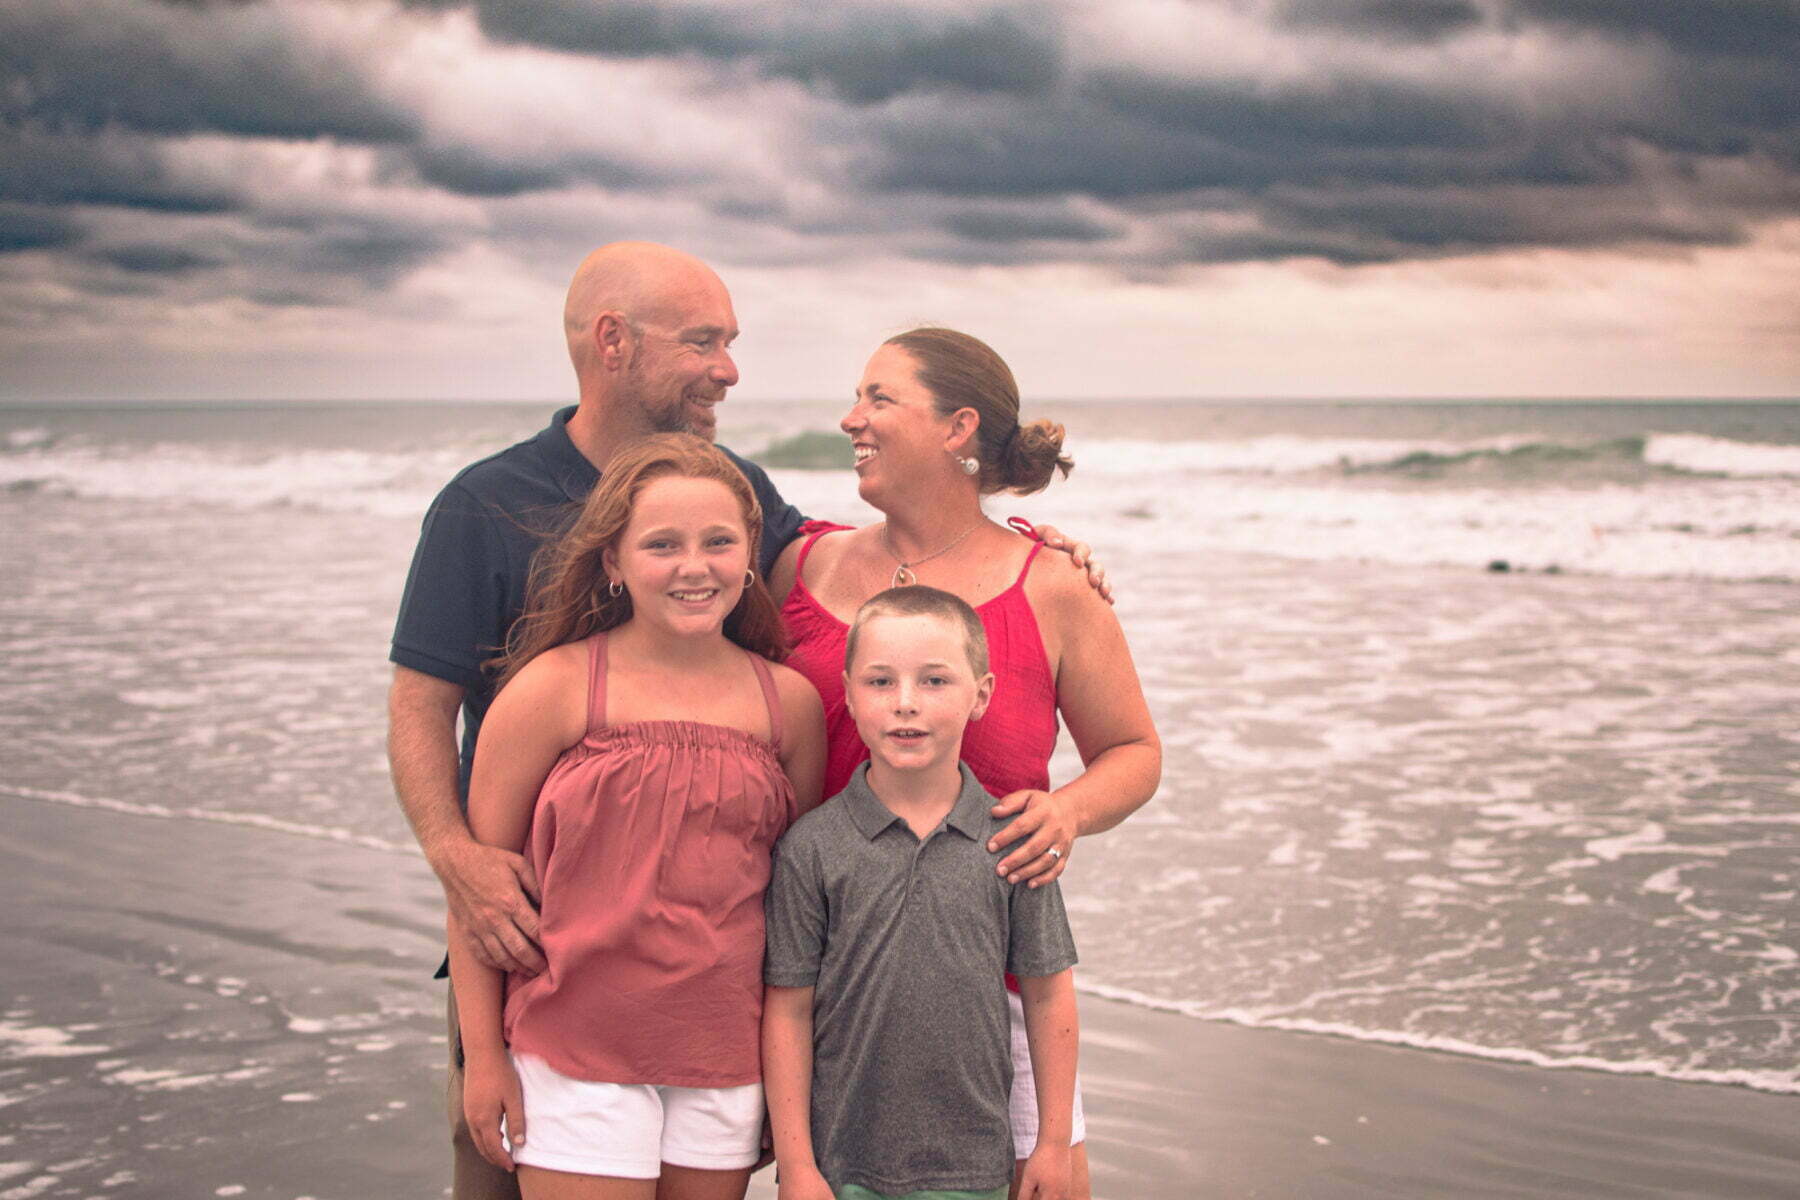 Family photography session at Sunset Beach, NC.